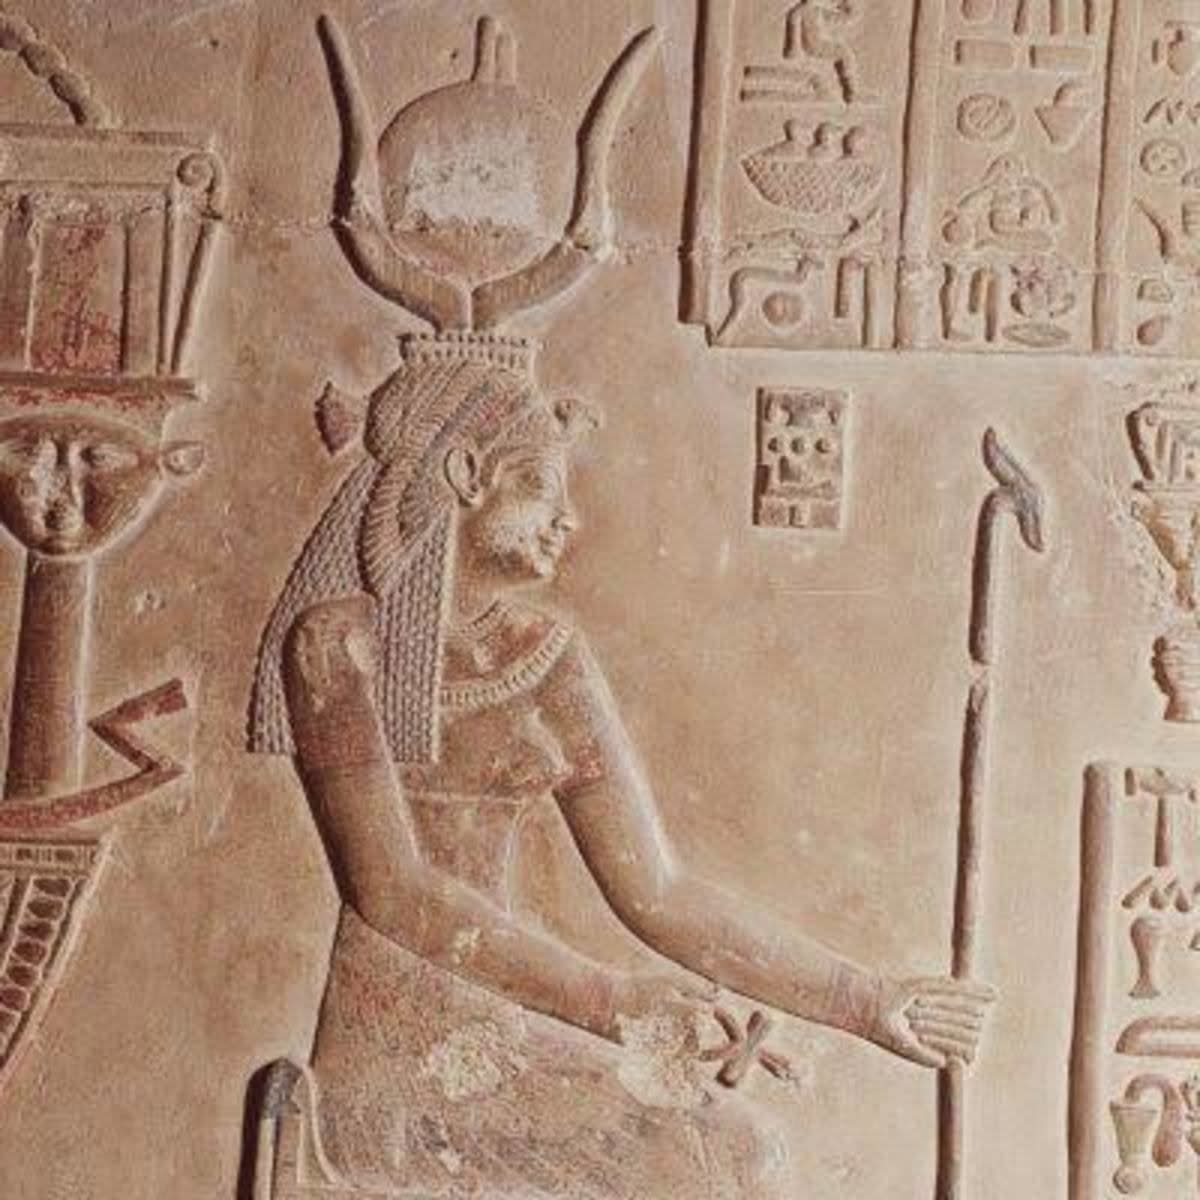 The Art of Cleopatra on the Wall of Temple of Hathor in Egypt